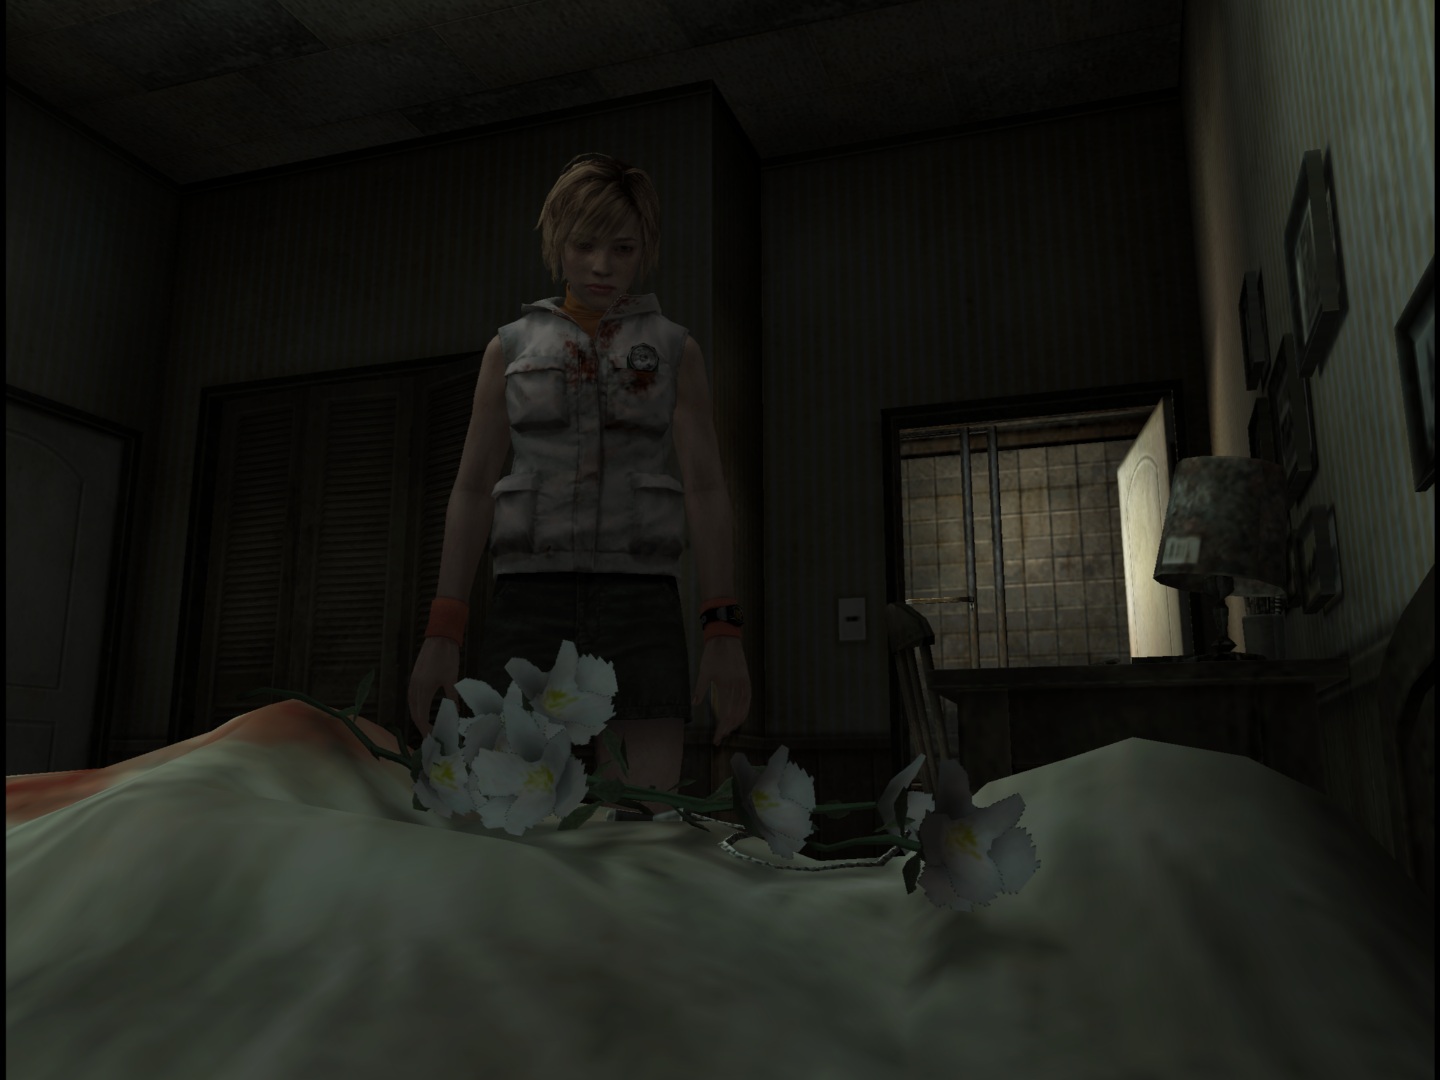 Silent Hill 3 – Hardcore Gaming 101